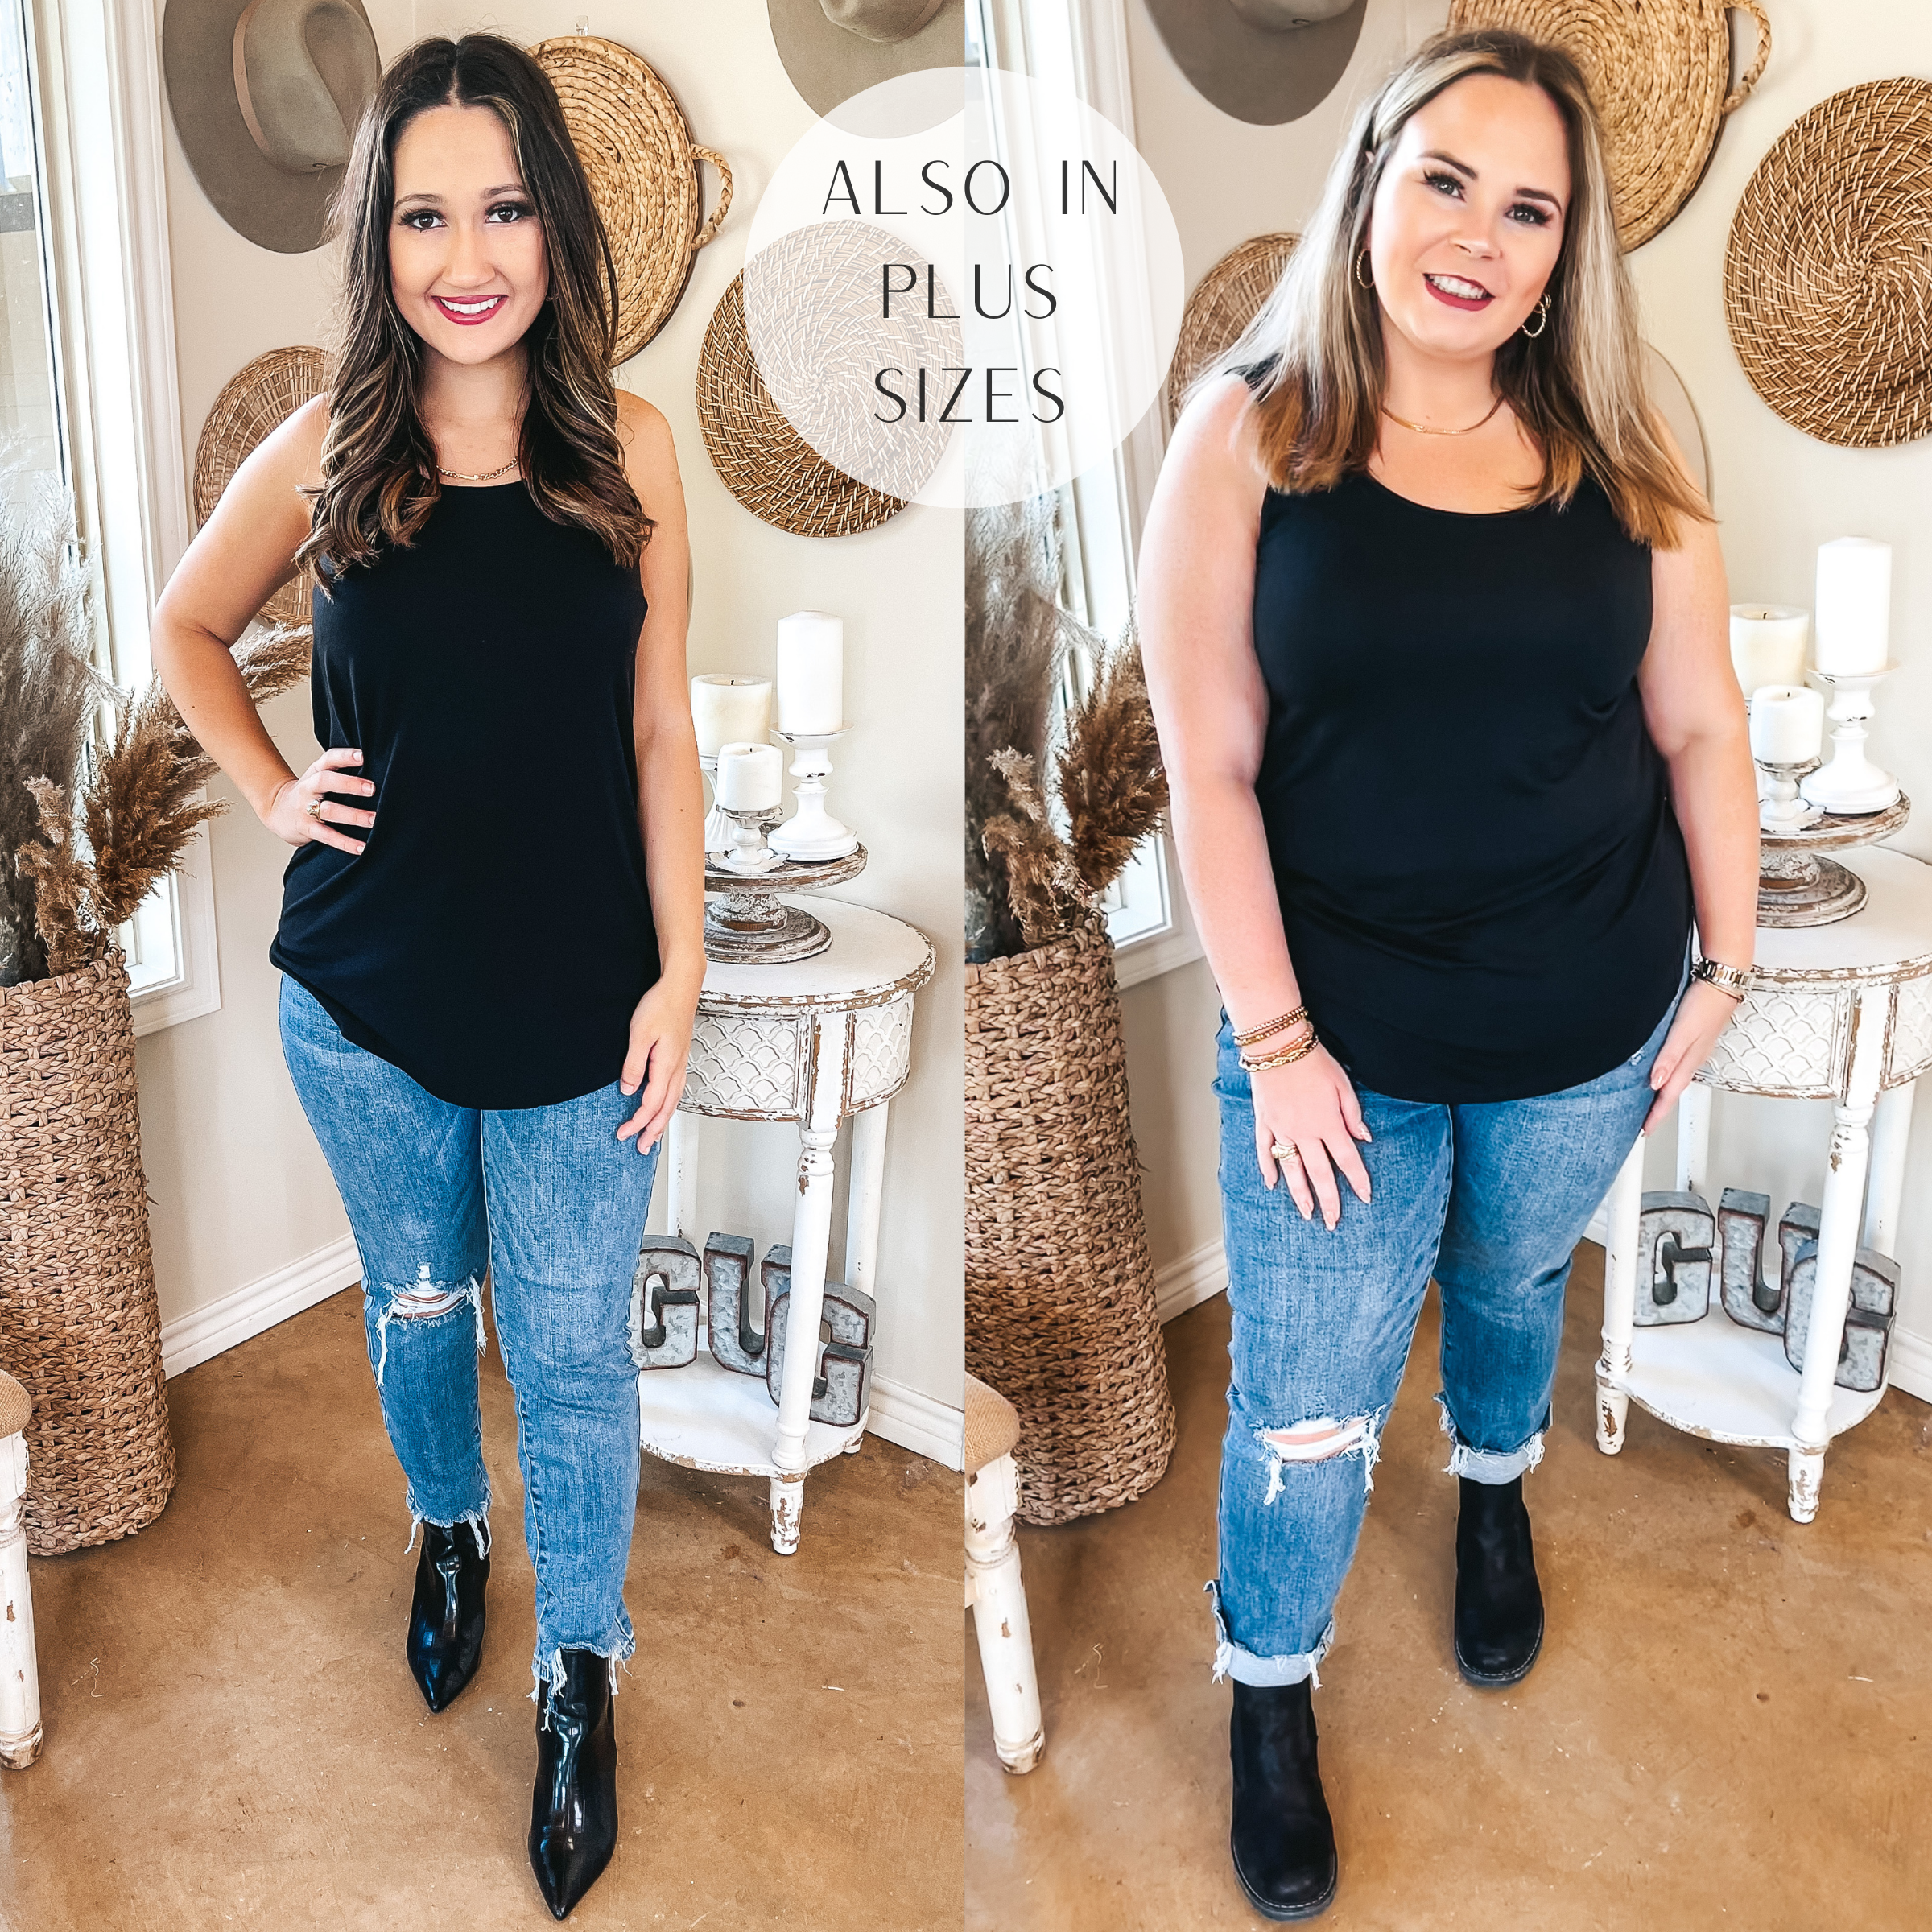 Models are wearing a black tank top with a scoop neckline. Both models have it paired with destroy knee jeans, black booties, and gold jewelry.